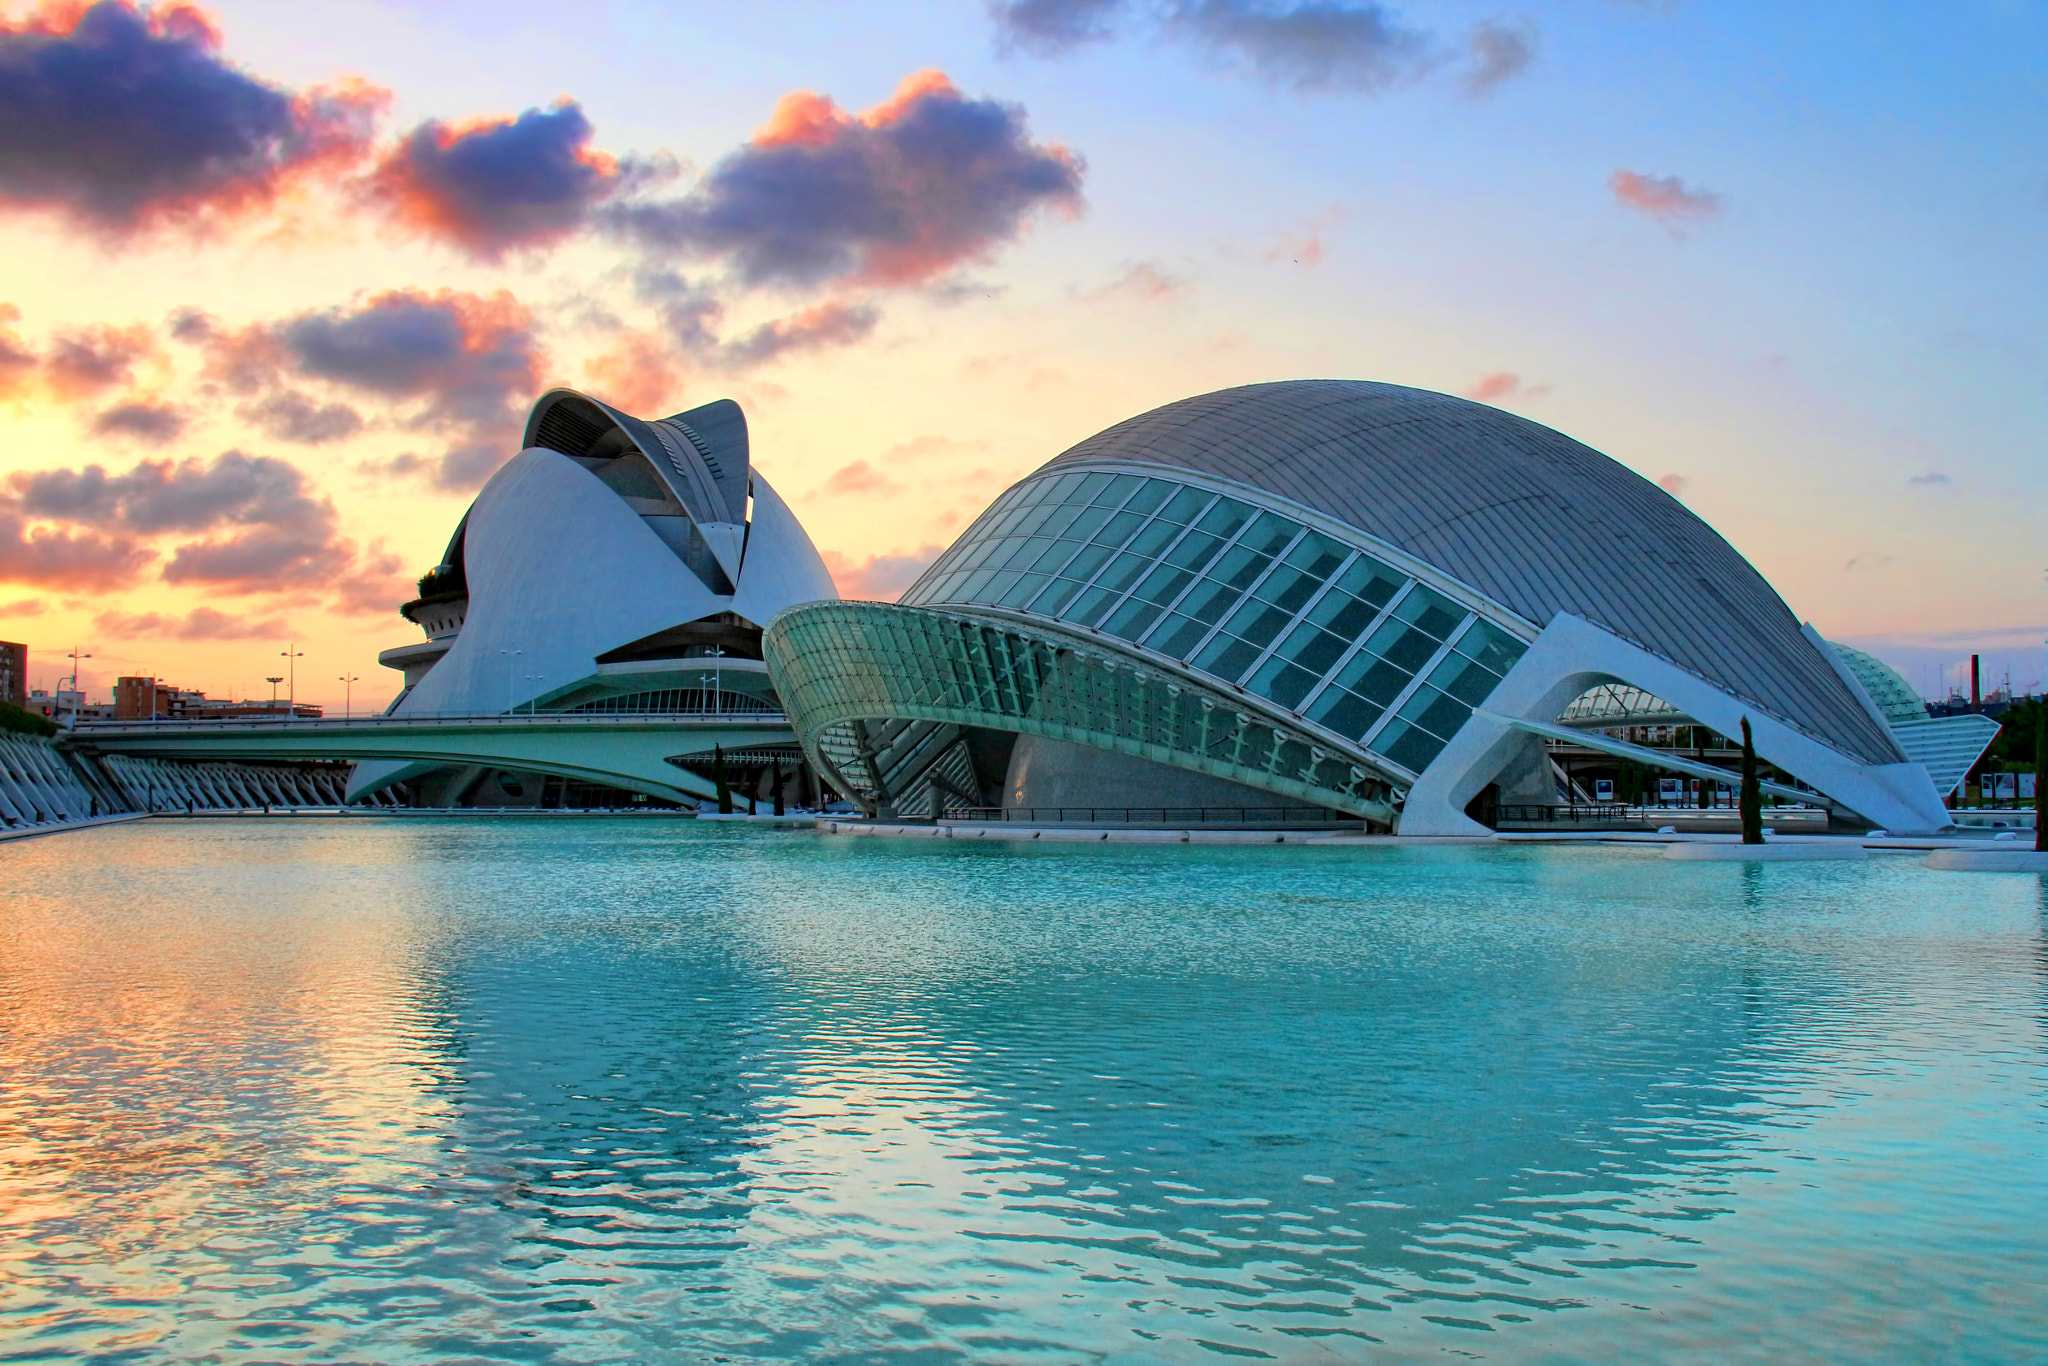 images my ideas 40/40 WC O Palsson Sunset_In_The_City_Of_Arts_And_Sciences_Valencia_Spain_(58944456).jpg